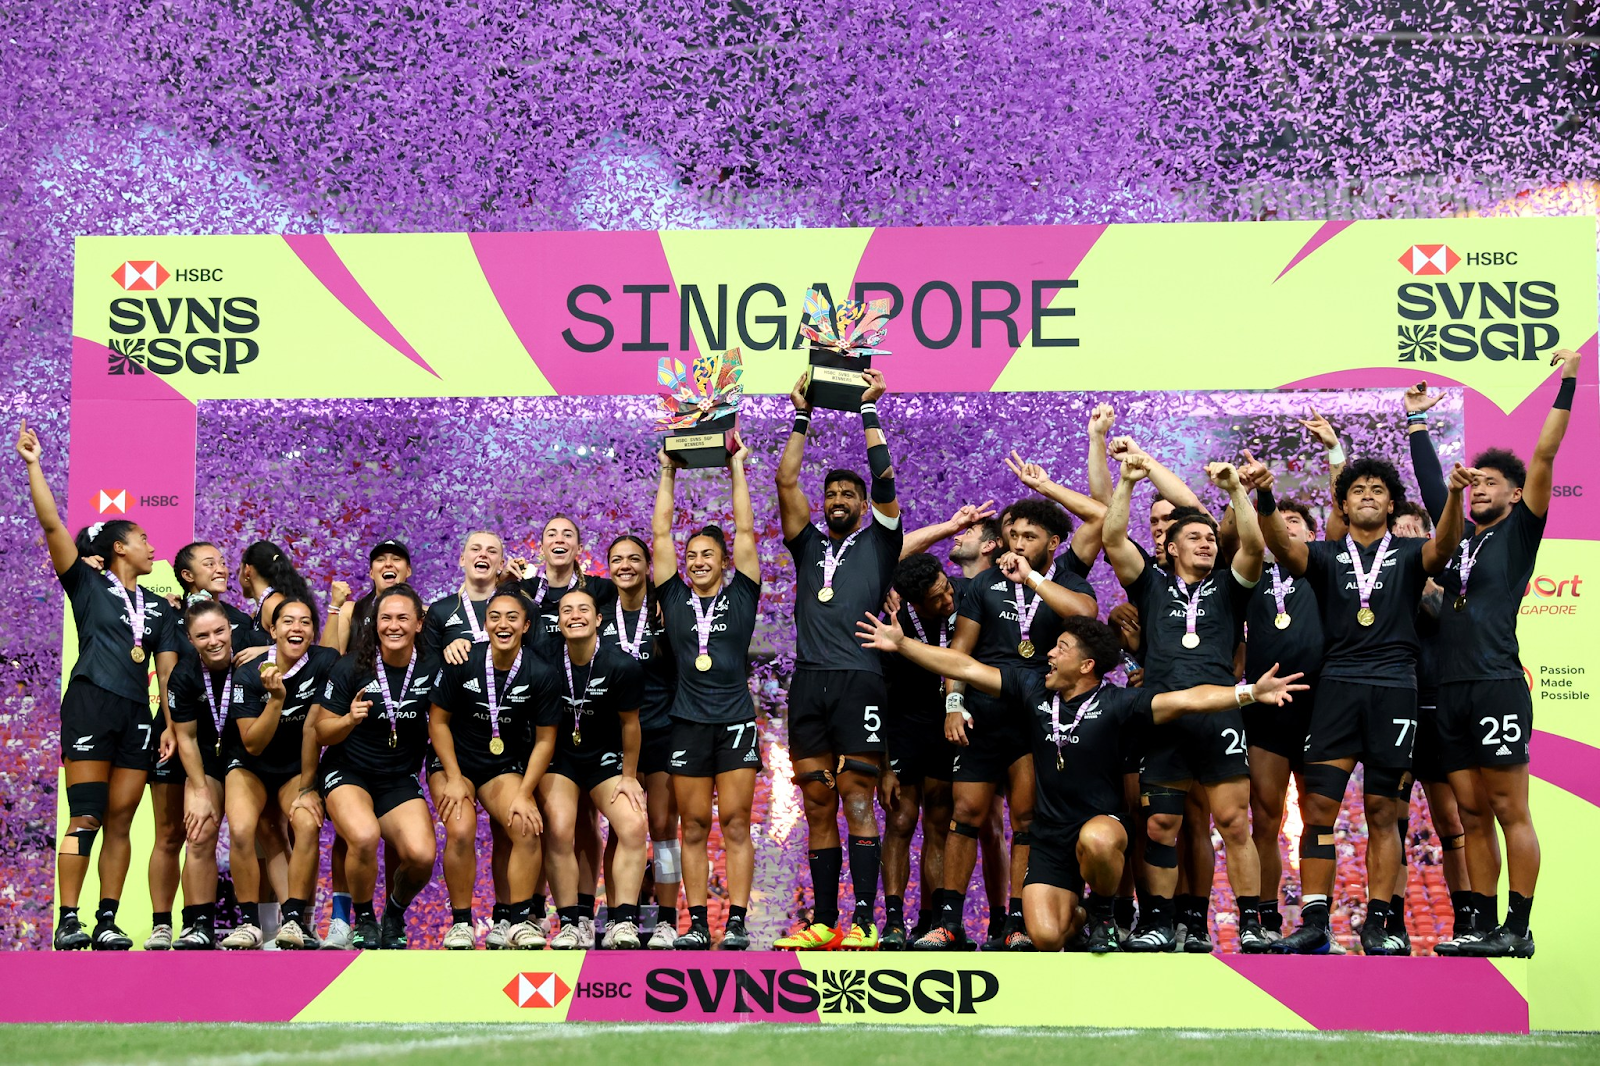 The Kiwis Emerge Victorious in Singapore Leg of HSBC SVNS